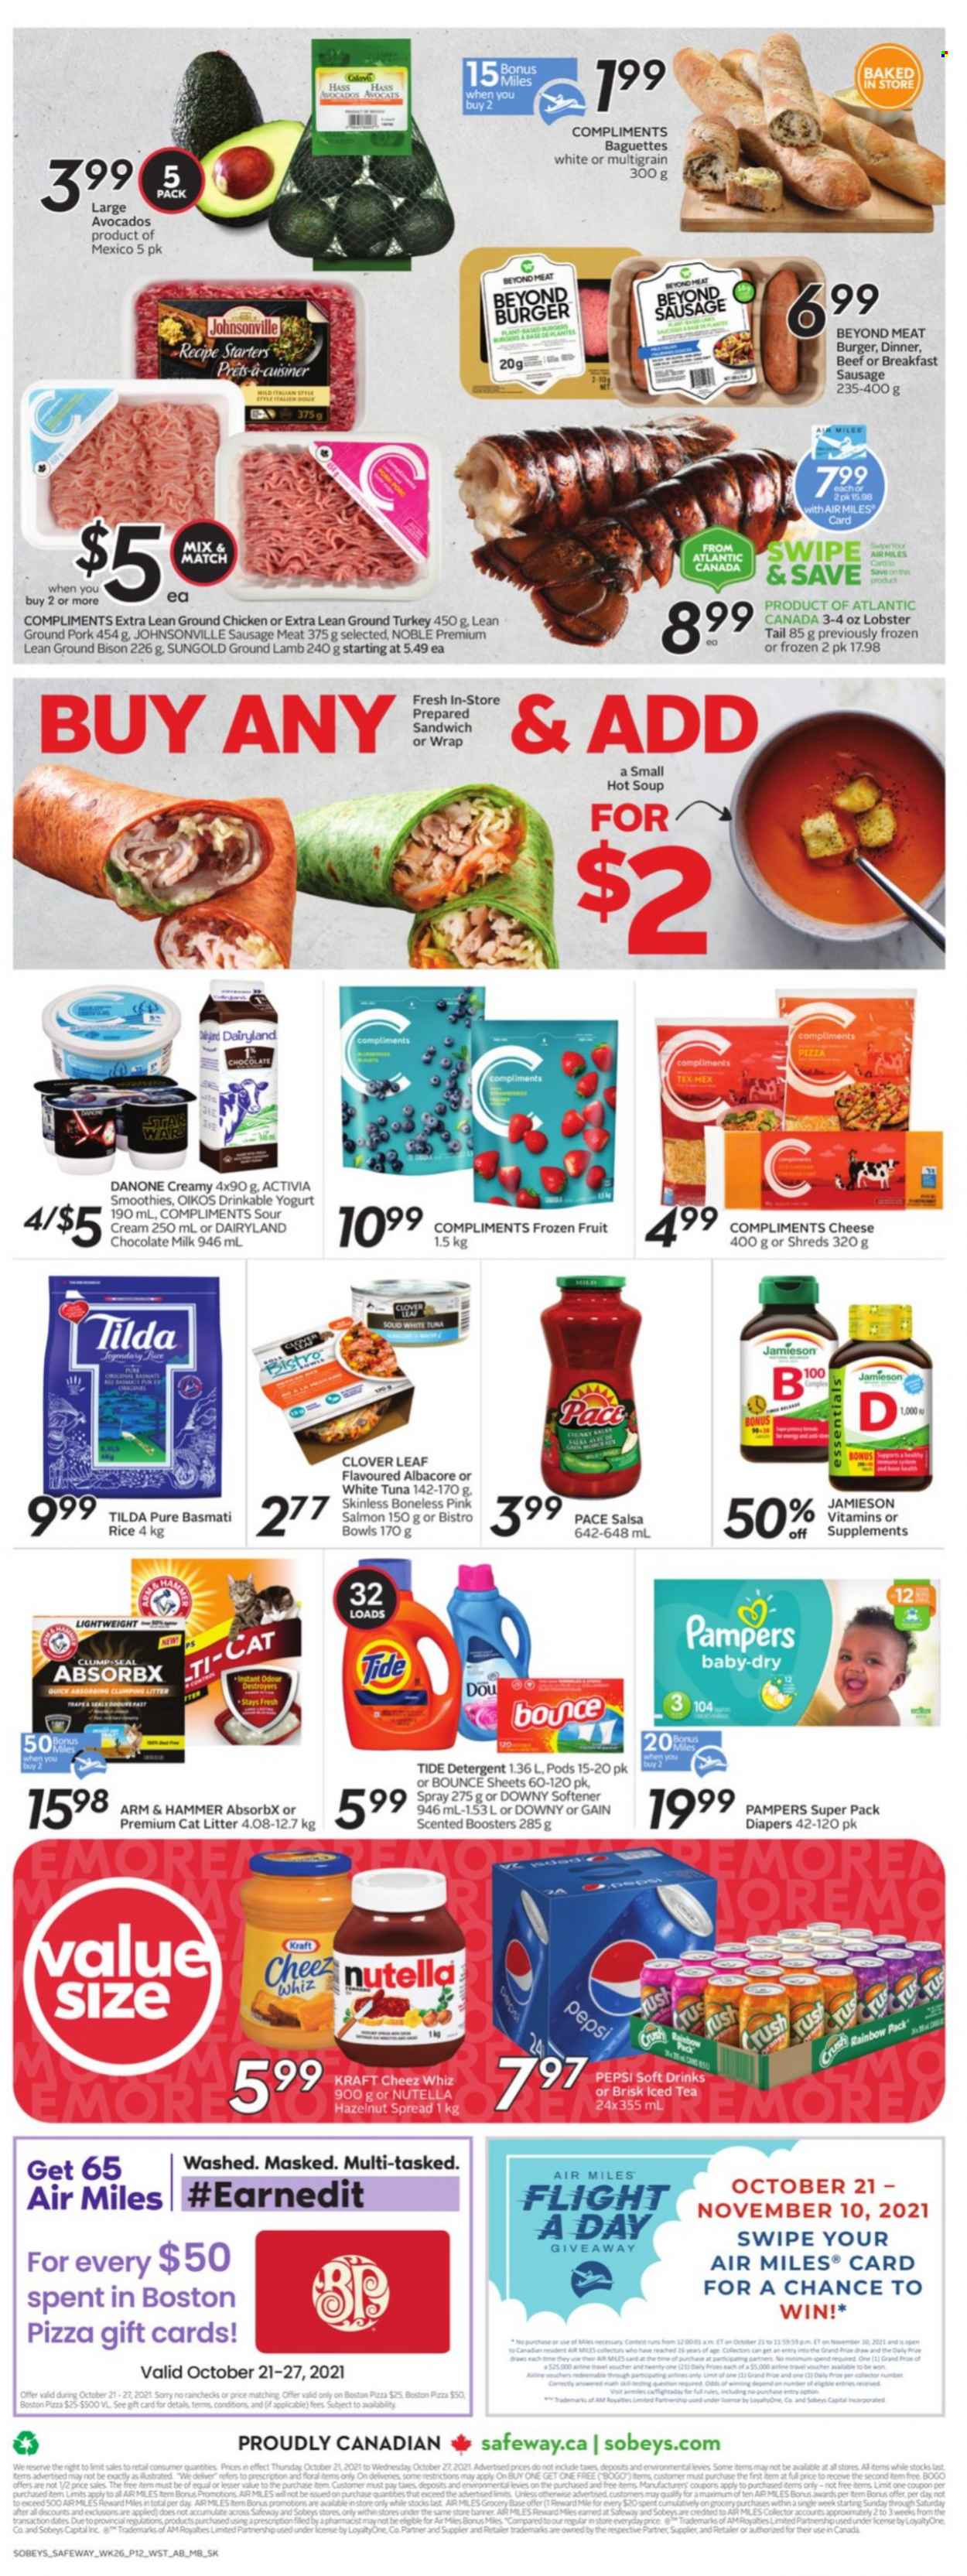 thumbnail - Safeway Flyer - October 21, 2021 - October 27, 2021 - Sales products - avocado, lobster, salmon, tuna, lobster tail, pizza, soup, hamburger, Kraft®, ham, Johnsonville, sausage, yoghurt, Clover, Activia, Oikos, milk, sour cream, milk chocolate, chocolate, ARM & HAMMER, basmati rice, rice, salsa, hazelnut spread, Pepsi, ice tea, soft drink, smoothie, ground chicken, ground turkey, chicken, turkey, bison meat, ground lamb, ground pork, sausage meat, lamb meat, nappies, Gain, Tide, fabric softener, Bounce, Downy Laundry, Danone, baguette, detergent, Pampers, Nutella. Page 2.